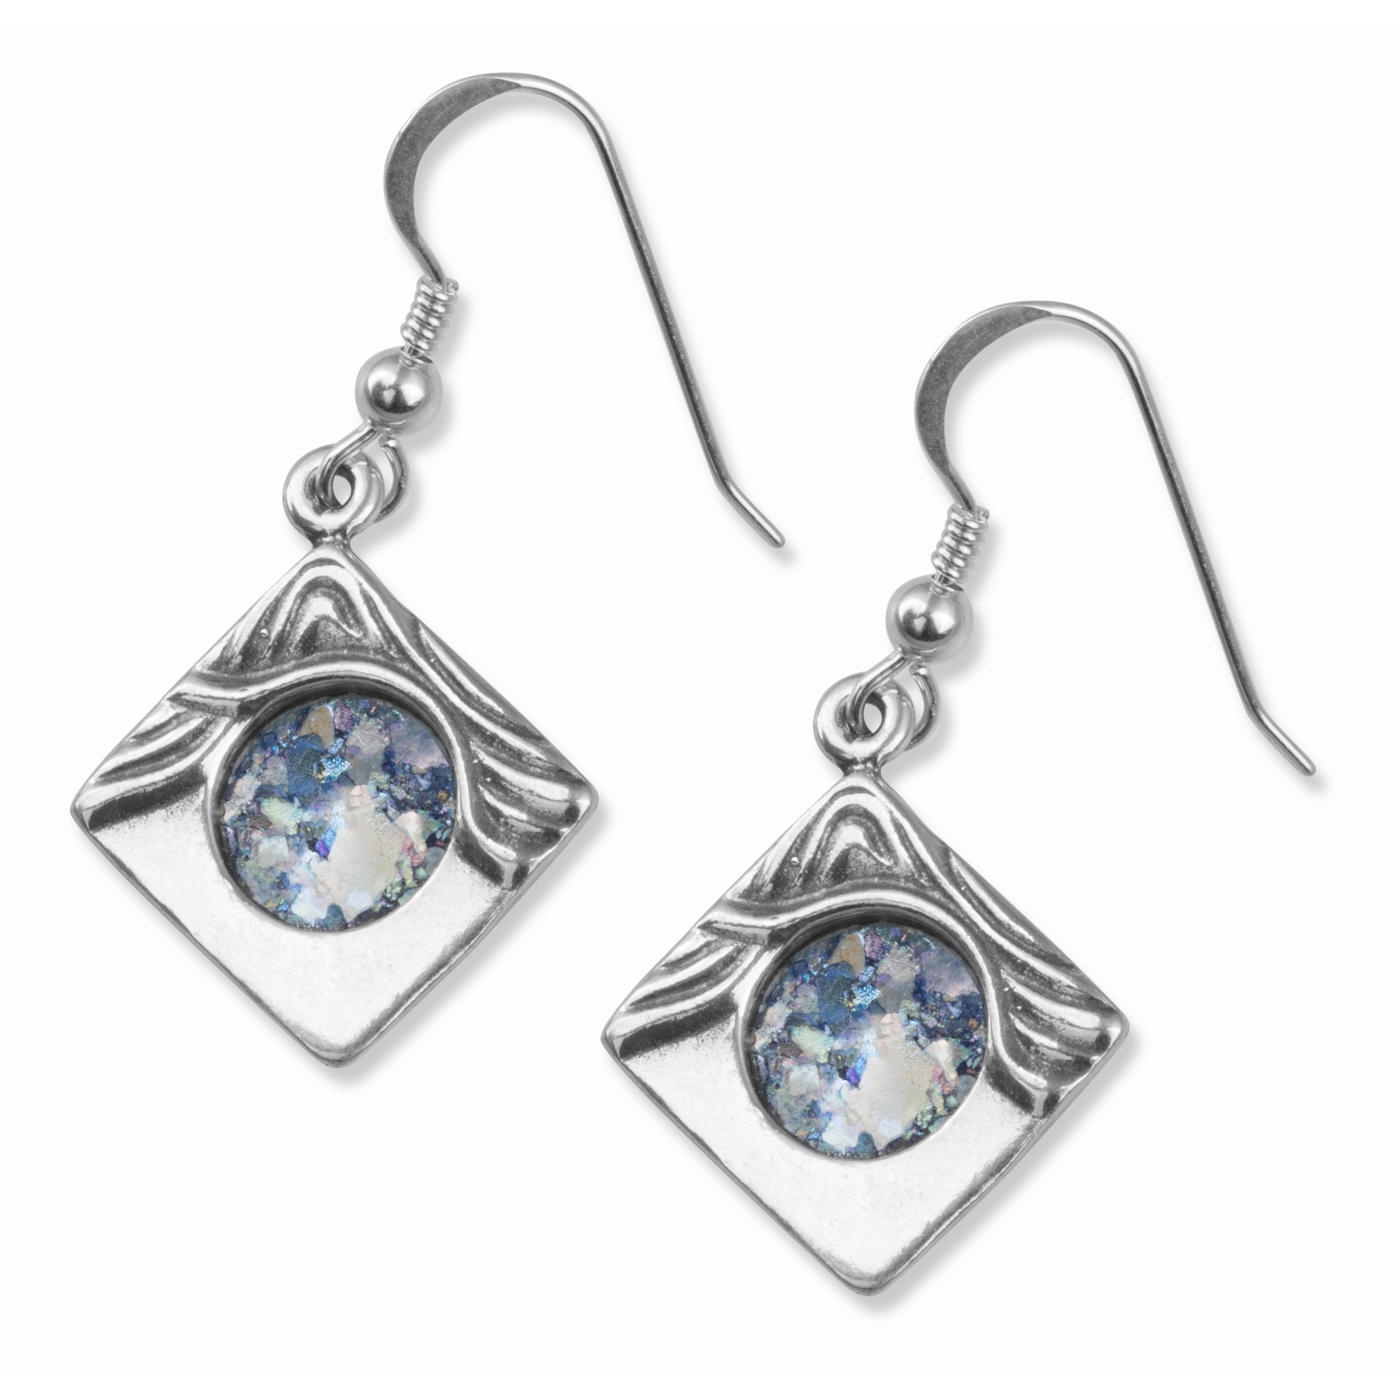 925 Sterling Silver Square Wave Earrings with Roman Glass Circles - 1